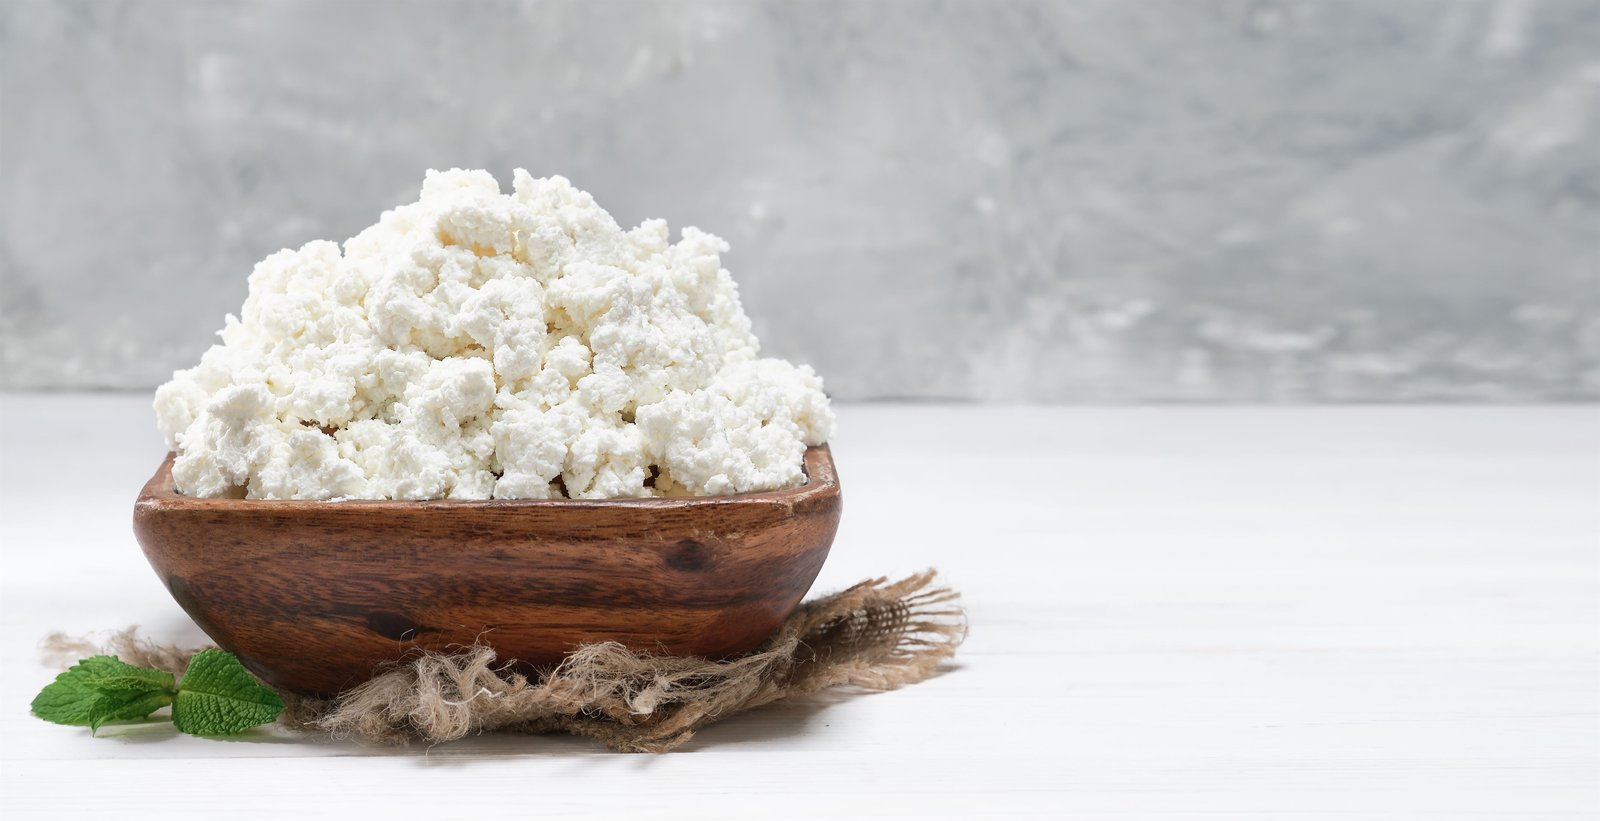 Cottage Cheese Benefits: Nutrition Facts And Risks